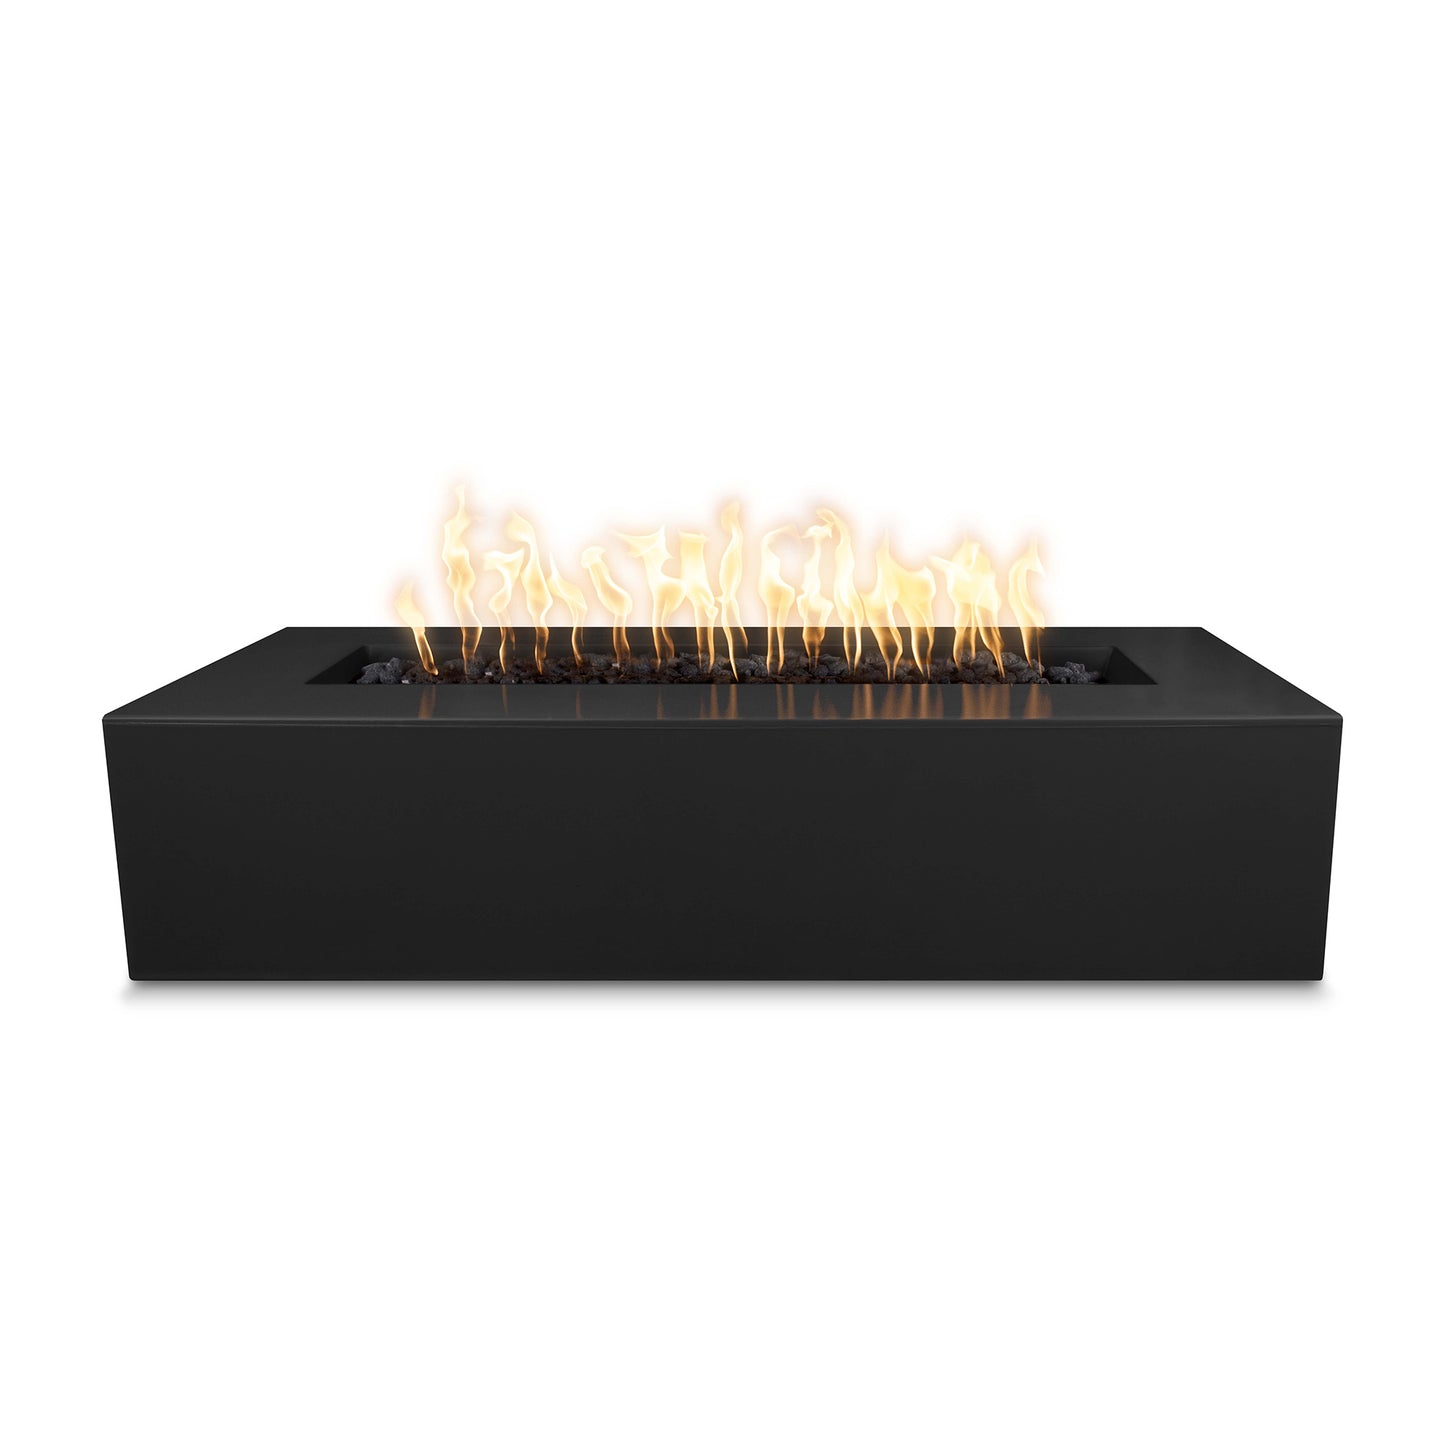 Regal Metal Fire Pit 60" - Electronic Ignition